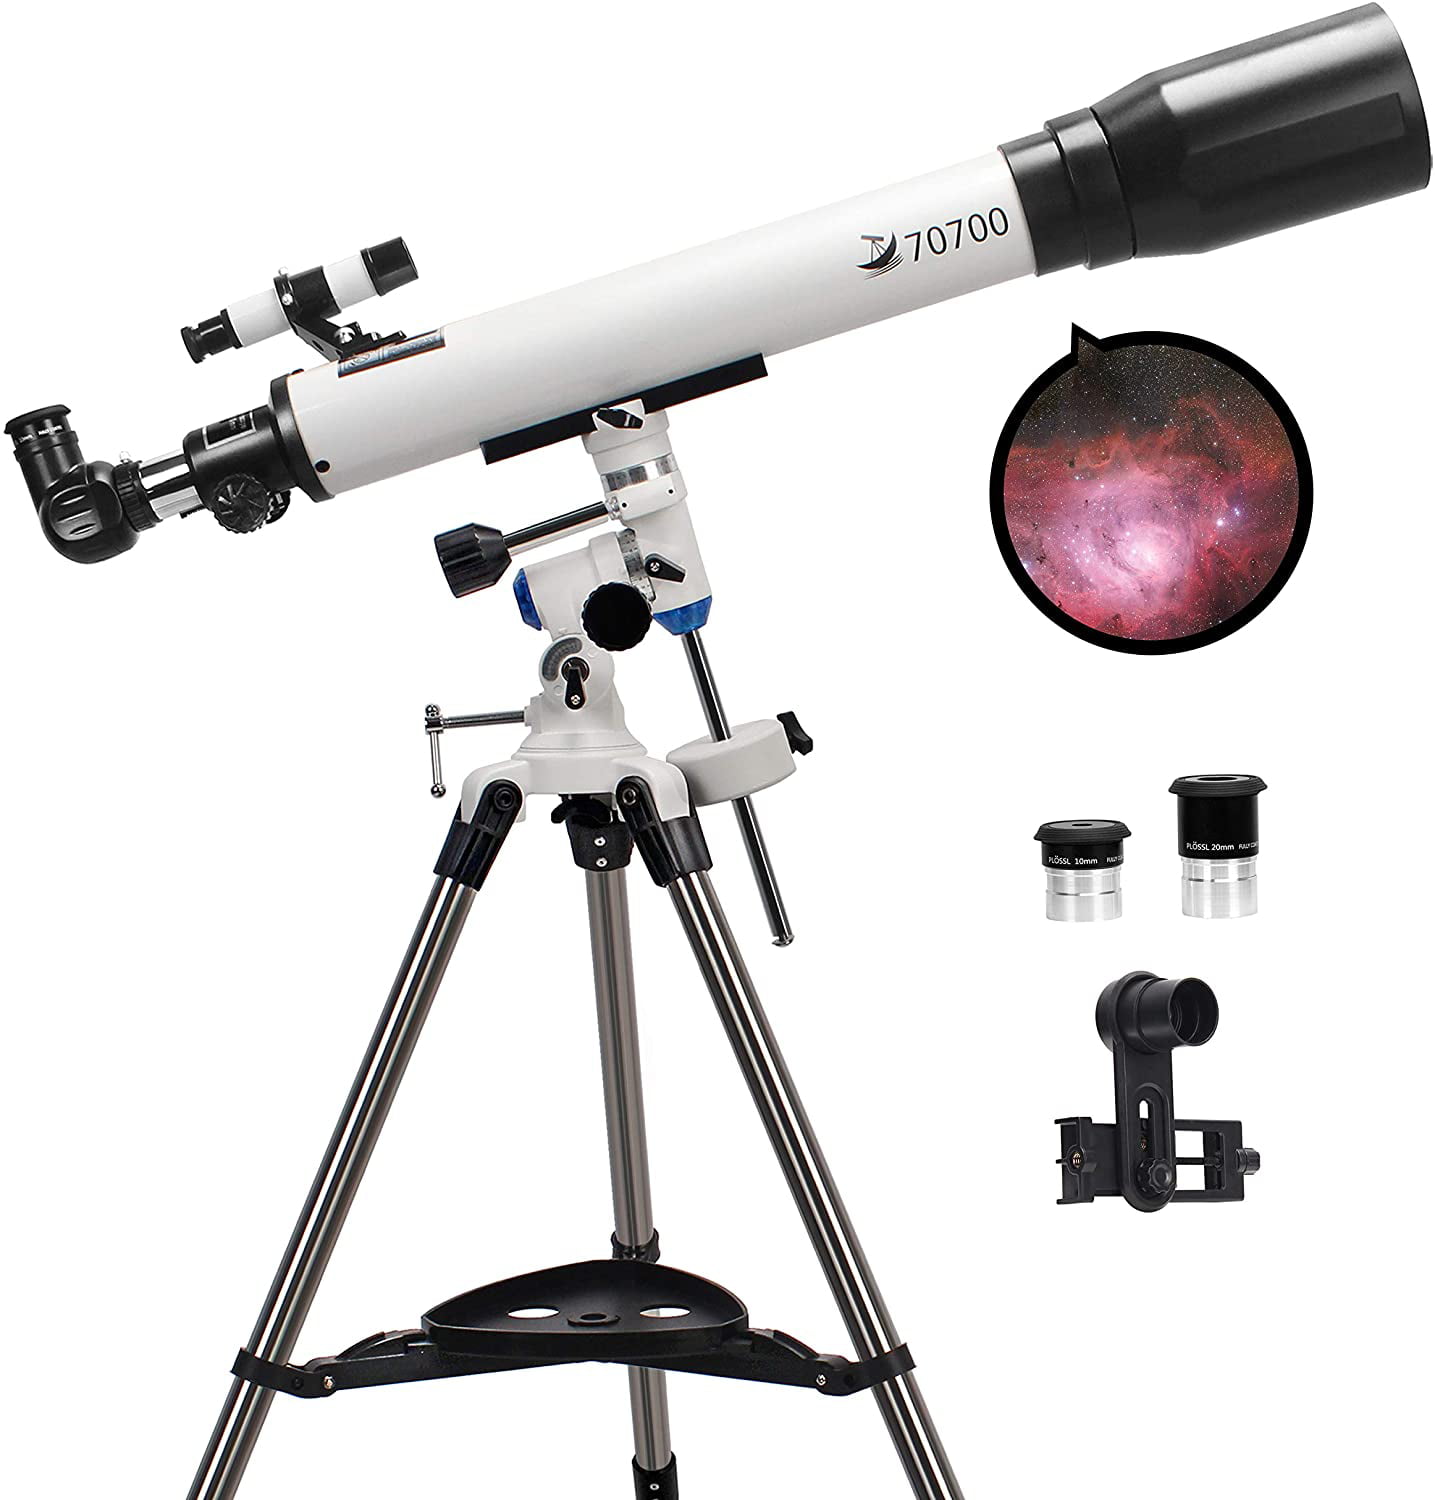 Fully-Coated Glass Optics Kids and Beginners Adjustable-Height Tripod and 3 Replaceable Eyepieces Silver 60mm Aperture 700mm Astronomical Monocular Telescope Refractor Telescope for Adults 